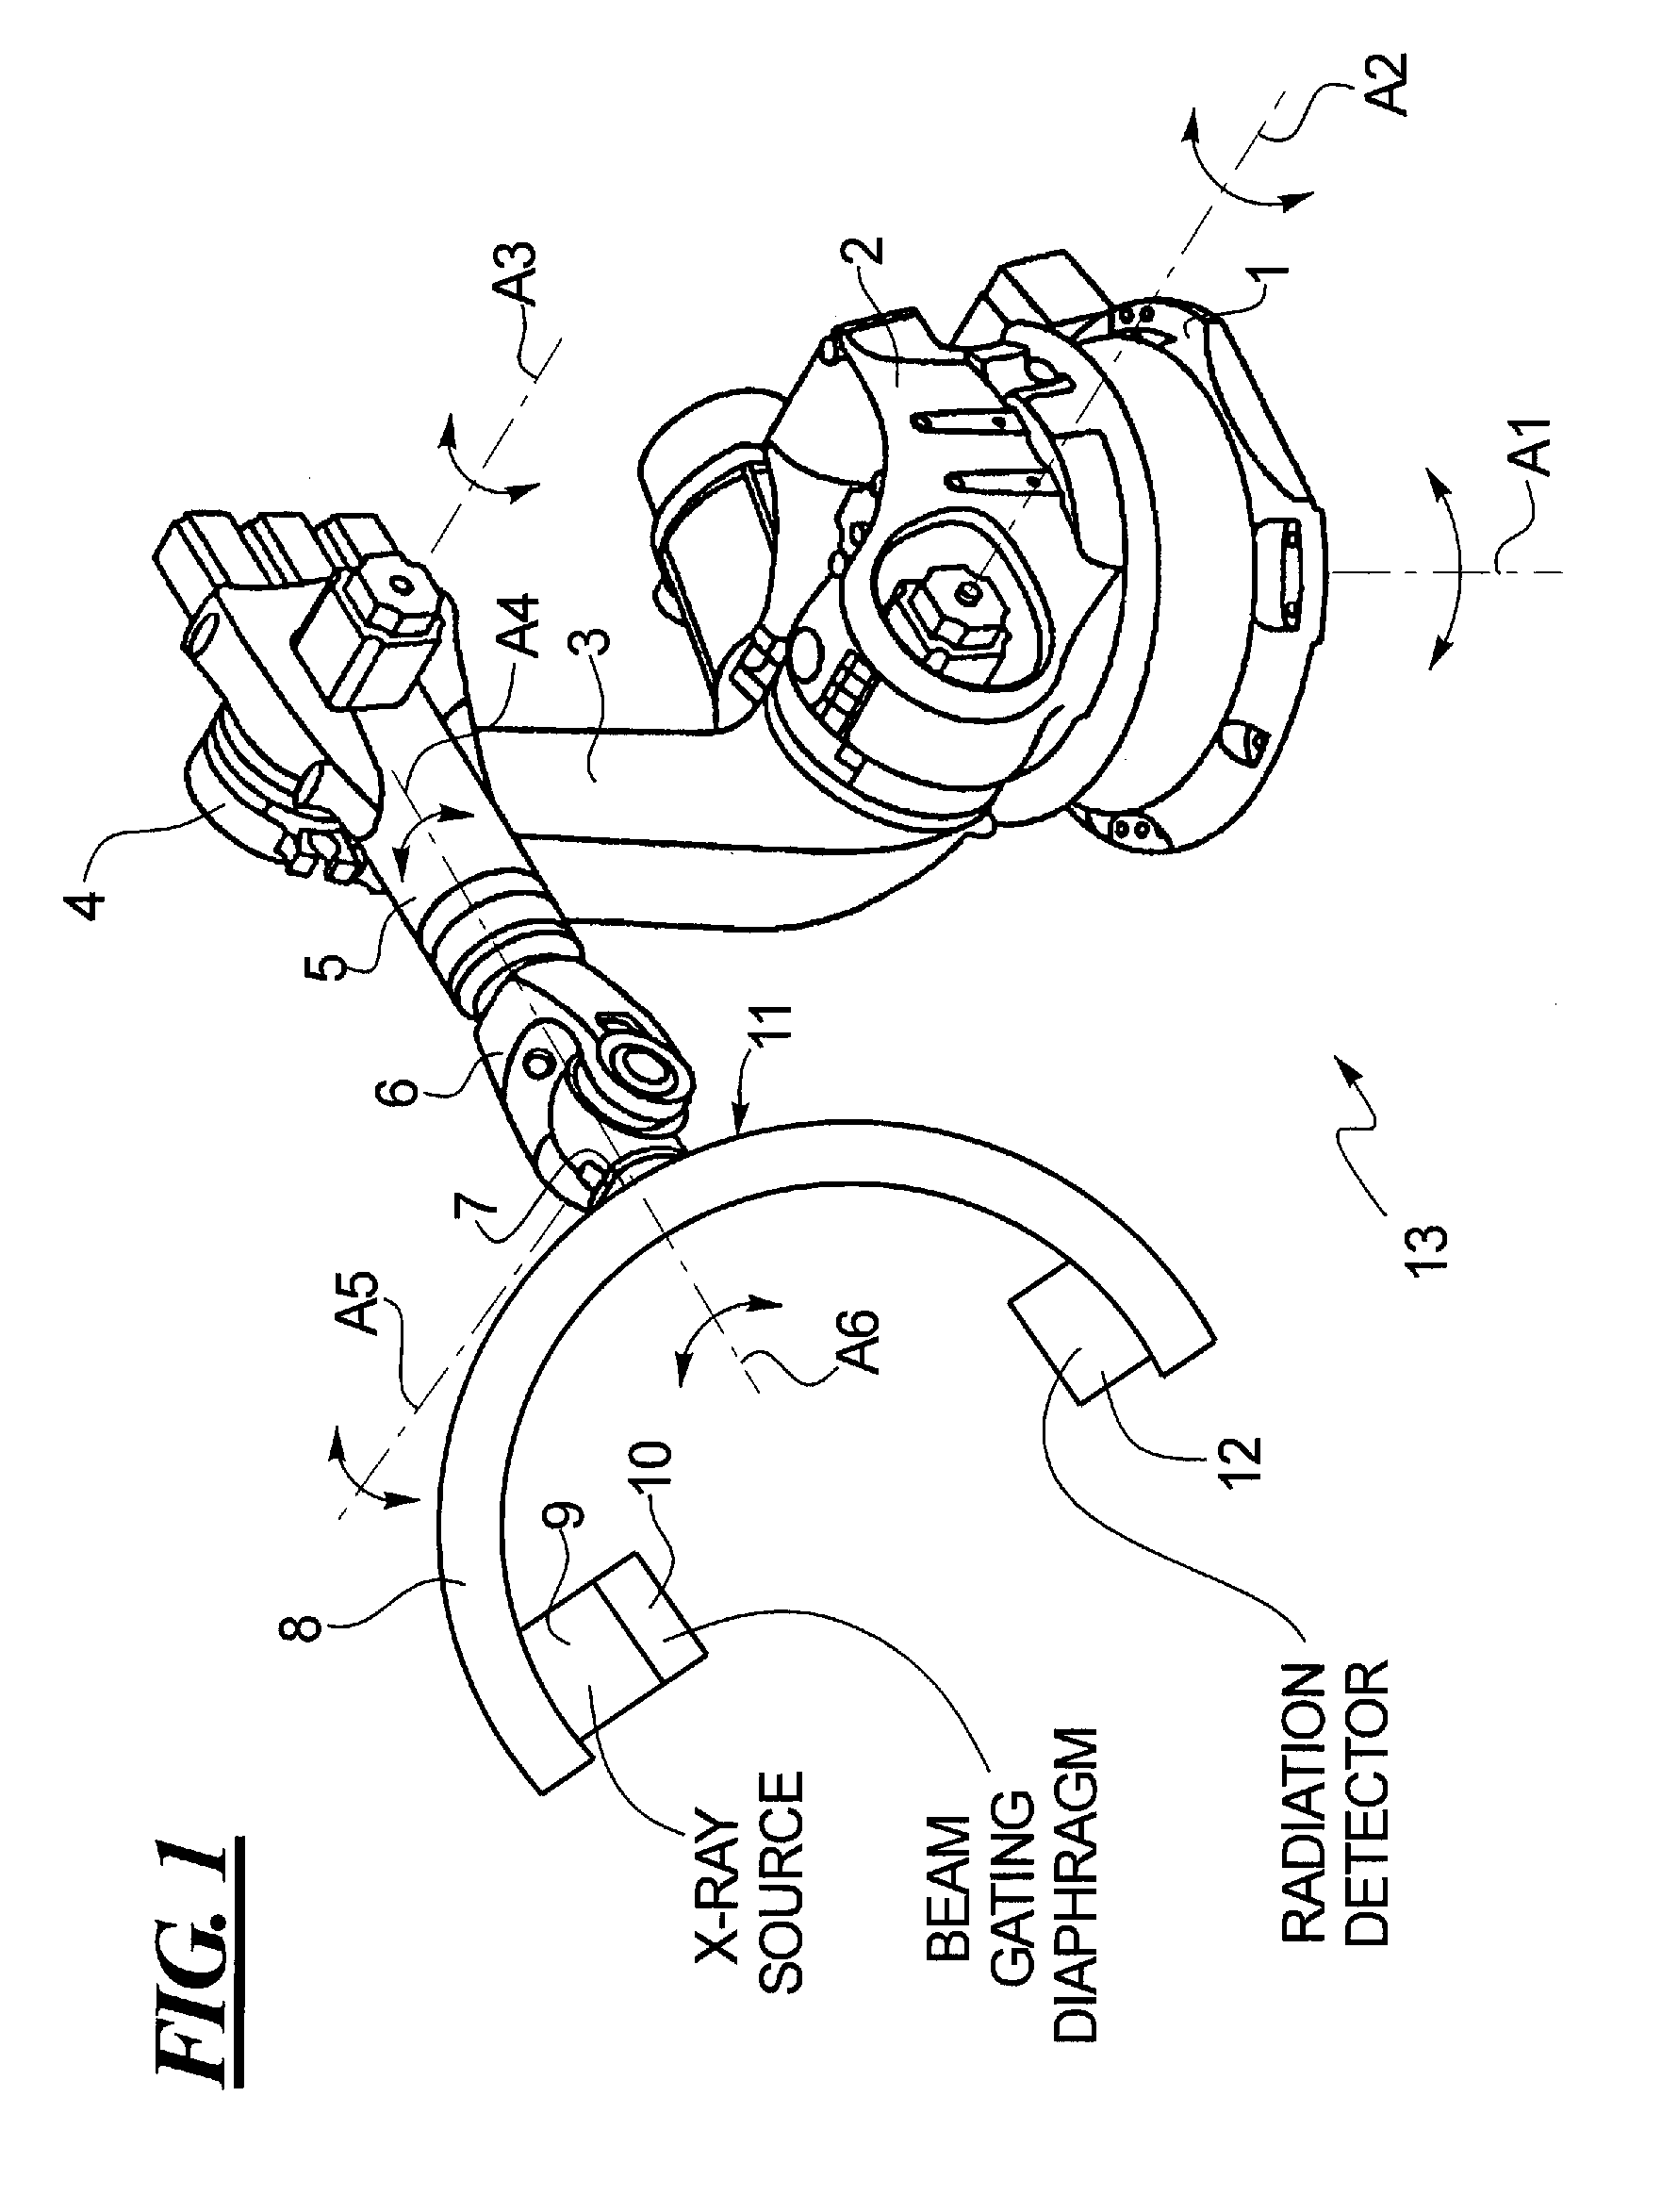 Method for therapy of heart valves with a robot-based x-ray device